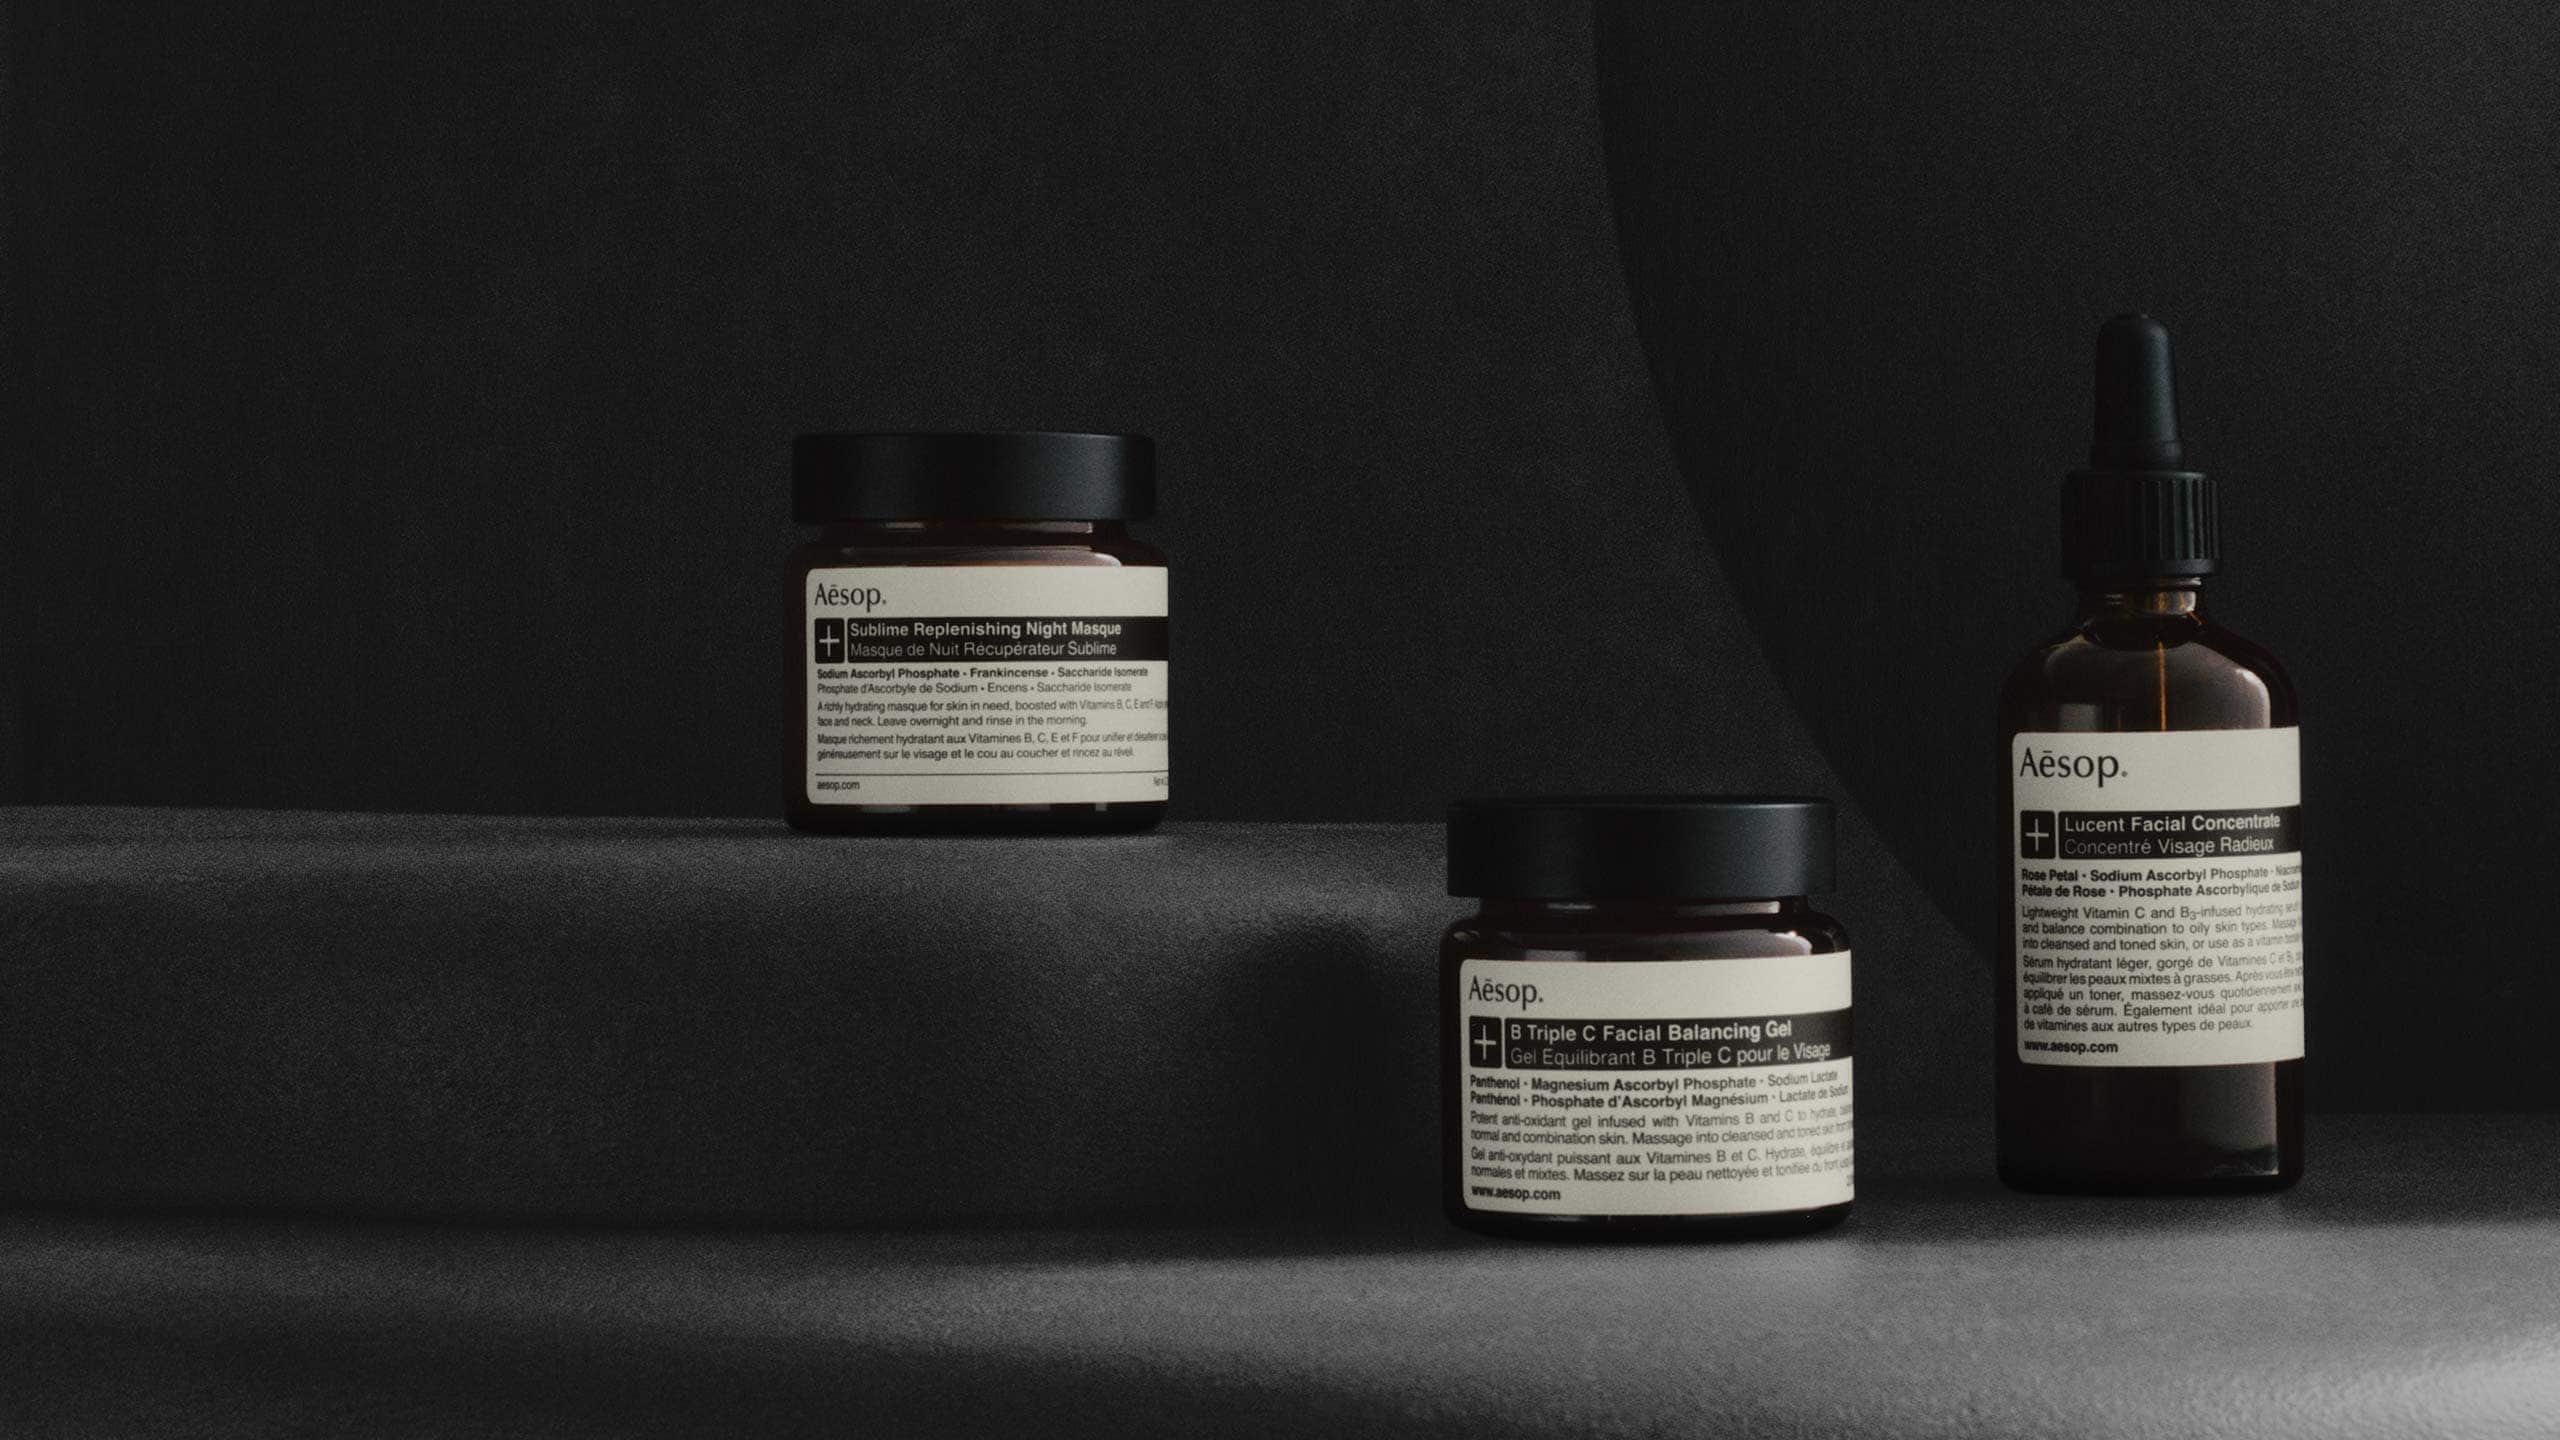 Line up of products on a greyscale set, featuring Sublime Replenishing Night Masque, B Triple C Facial Balancing Gel and Lucent Facial Concentrate